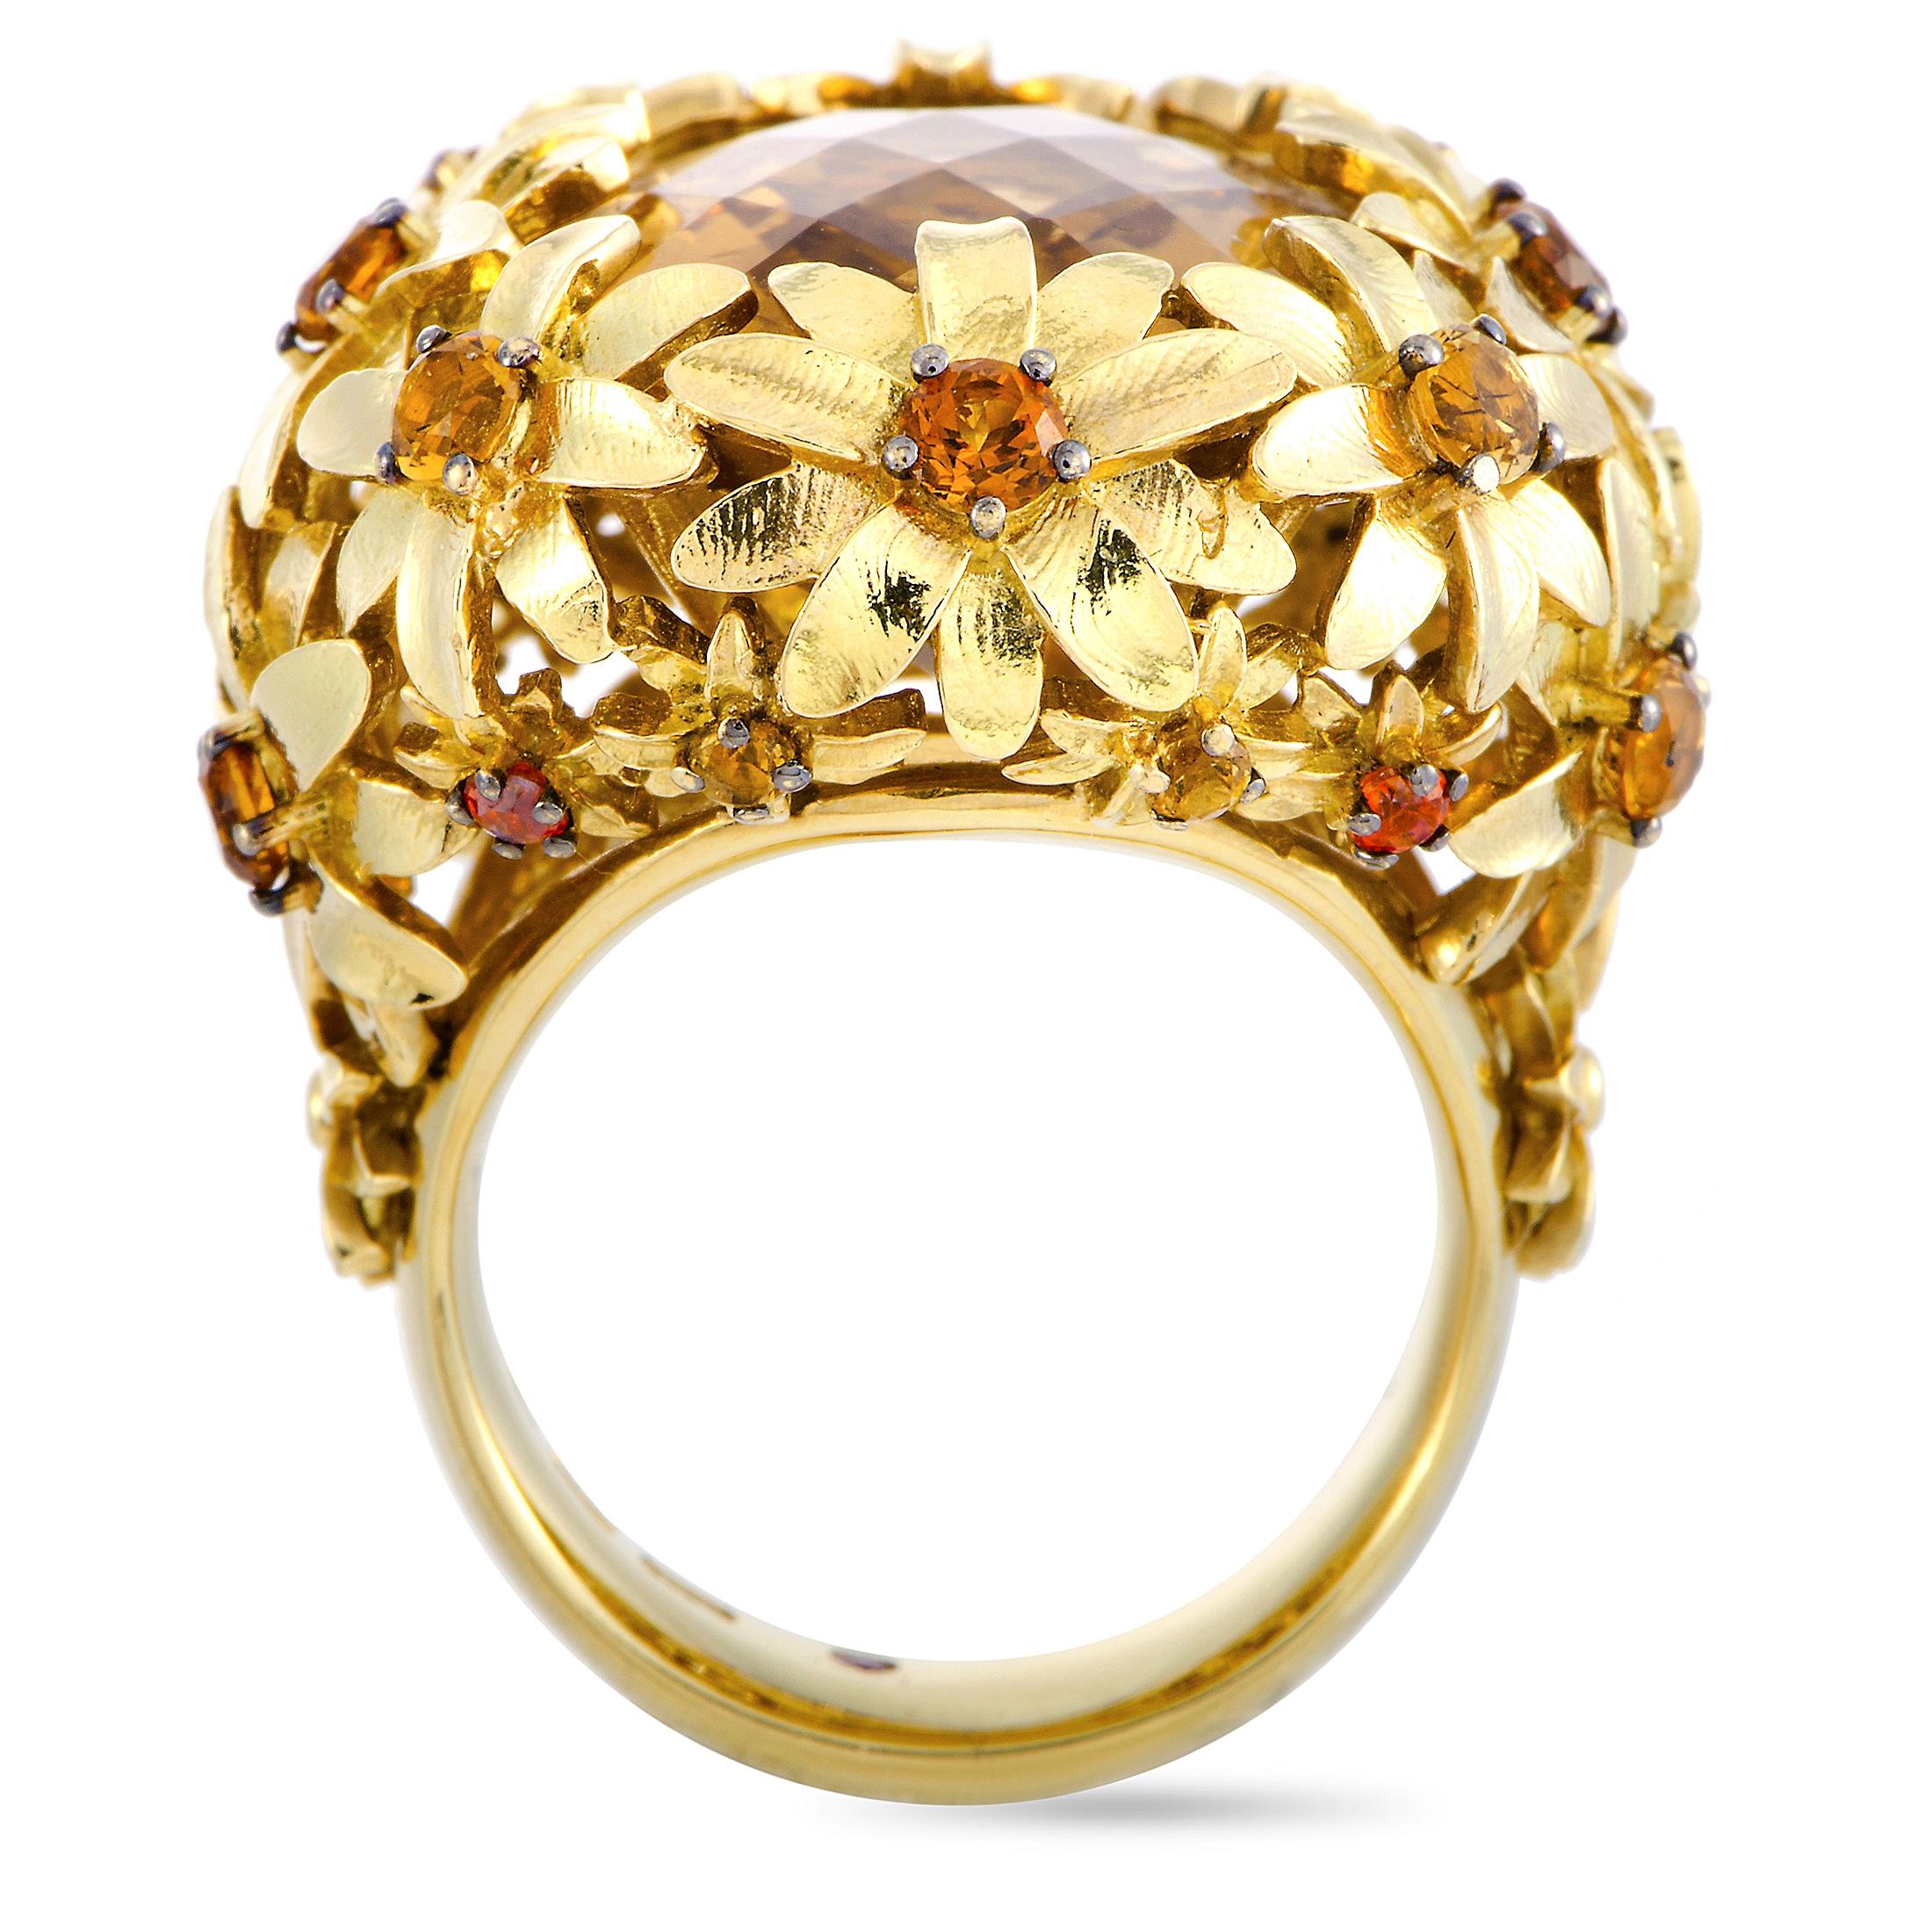 The Roberto Coin “Margherita” ring is crafted from 18K yellow gold and embellished with citrines. The ring weighs 29 grams, boasting band thickness of 4 mm and top height of 10 mm, while top dimensions measure 30 by 27 mm.

This item is offered in